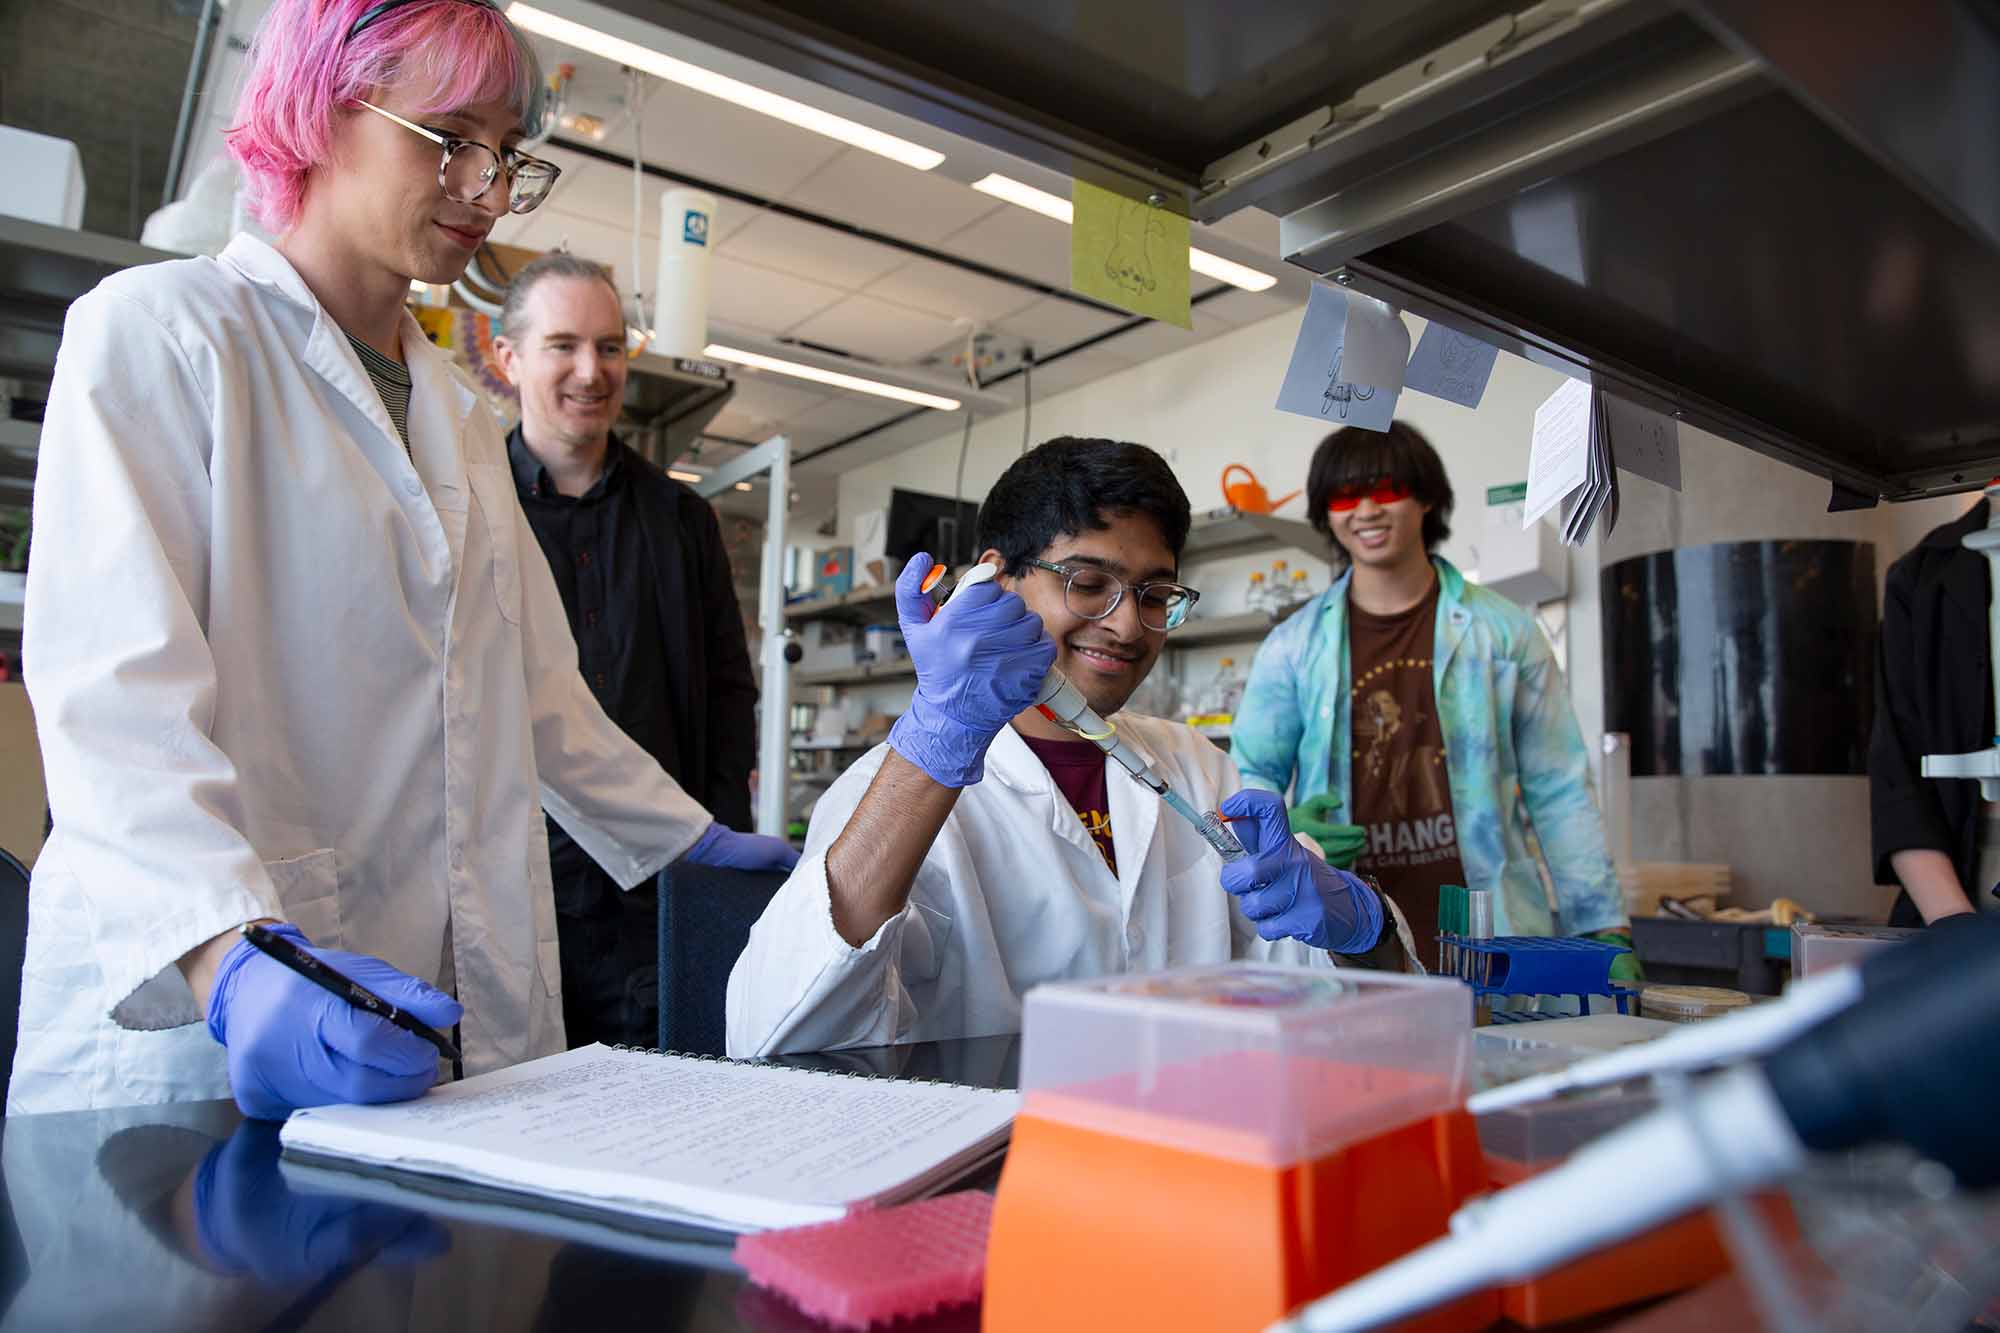 A group of three students, in lab gear, work at a lab bench in a laboratory, while an an advisor looks on from behind. The center student is pipetting while the student on the left takes notes.